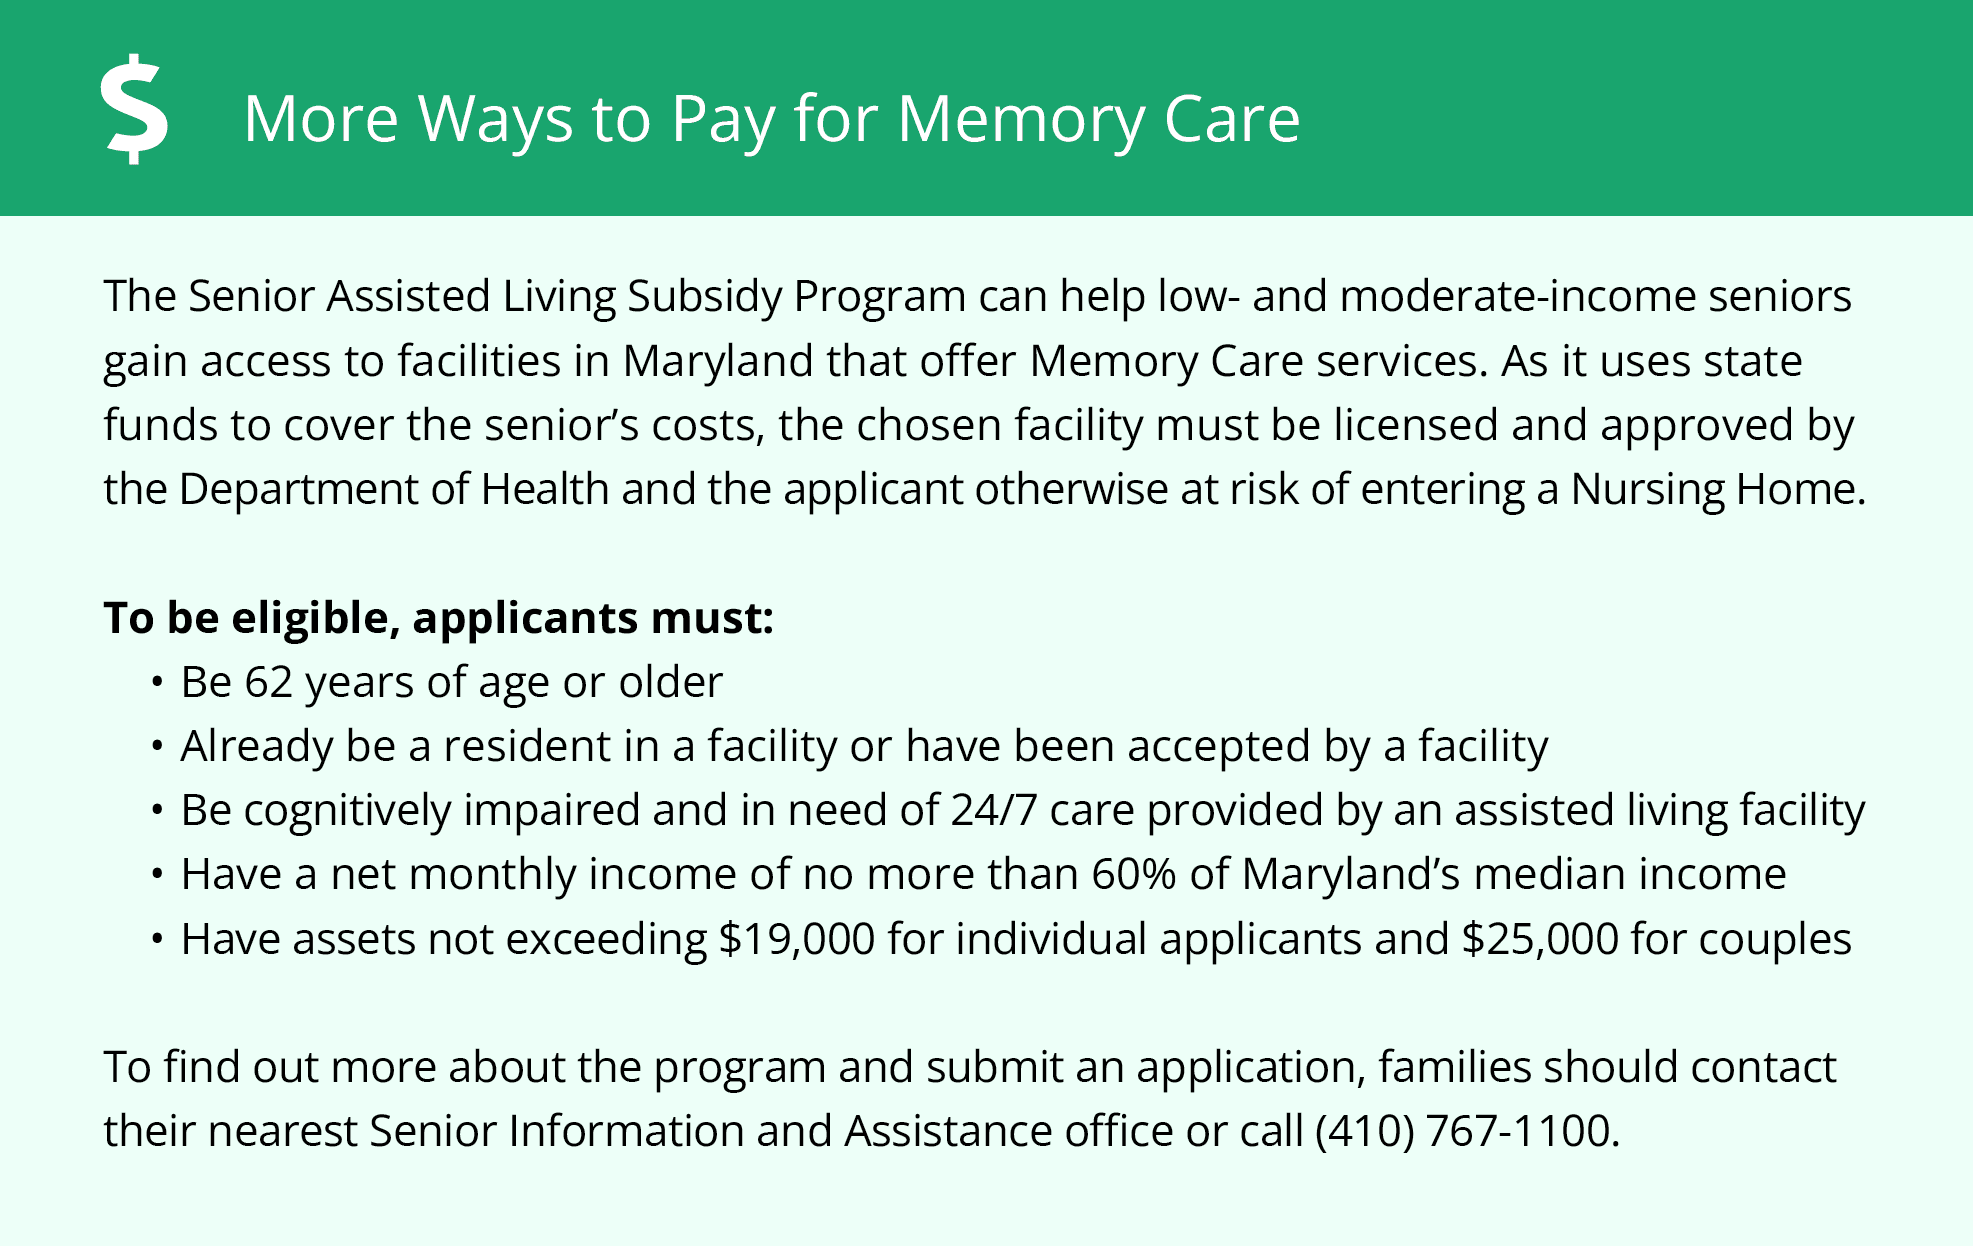 More ways to pay for memory care in MD